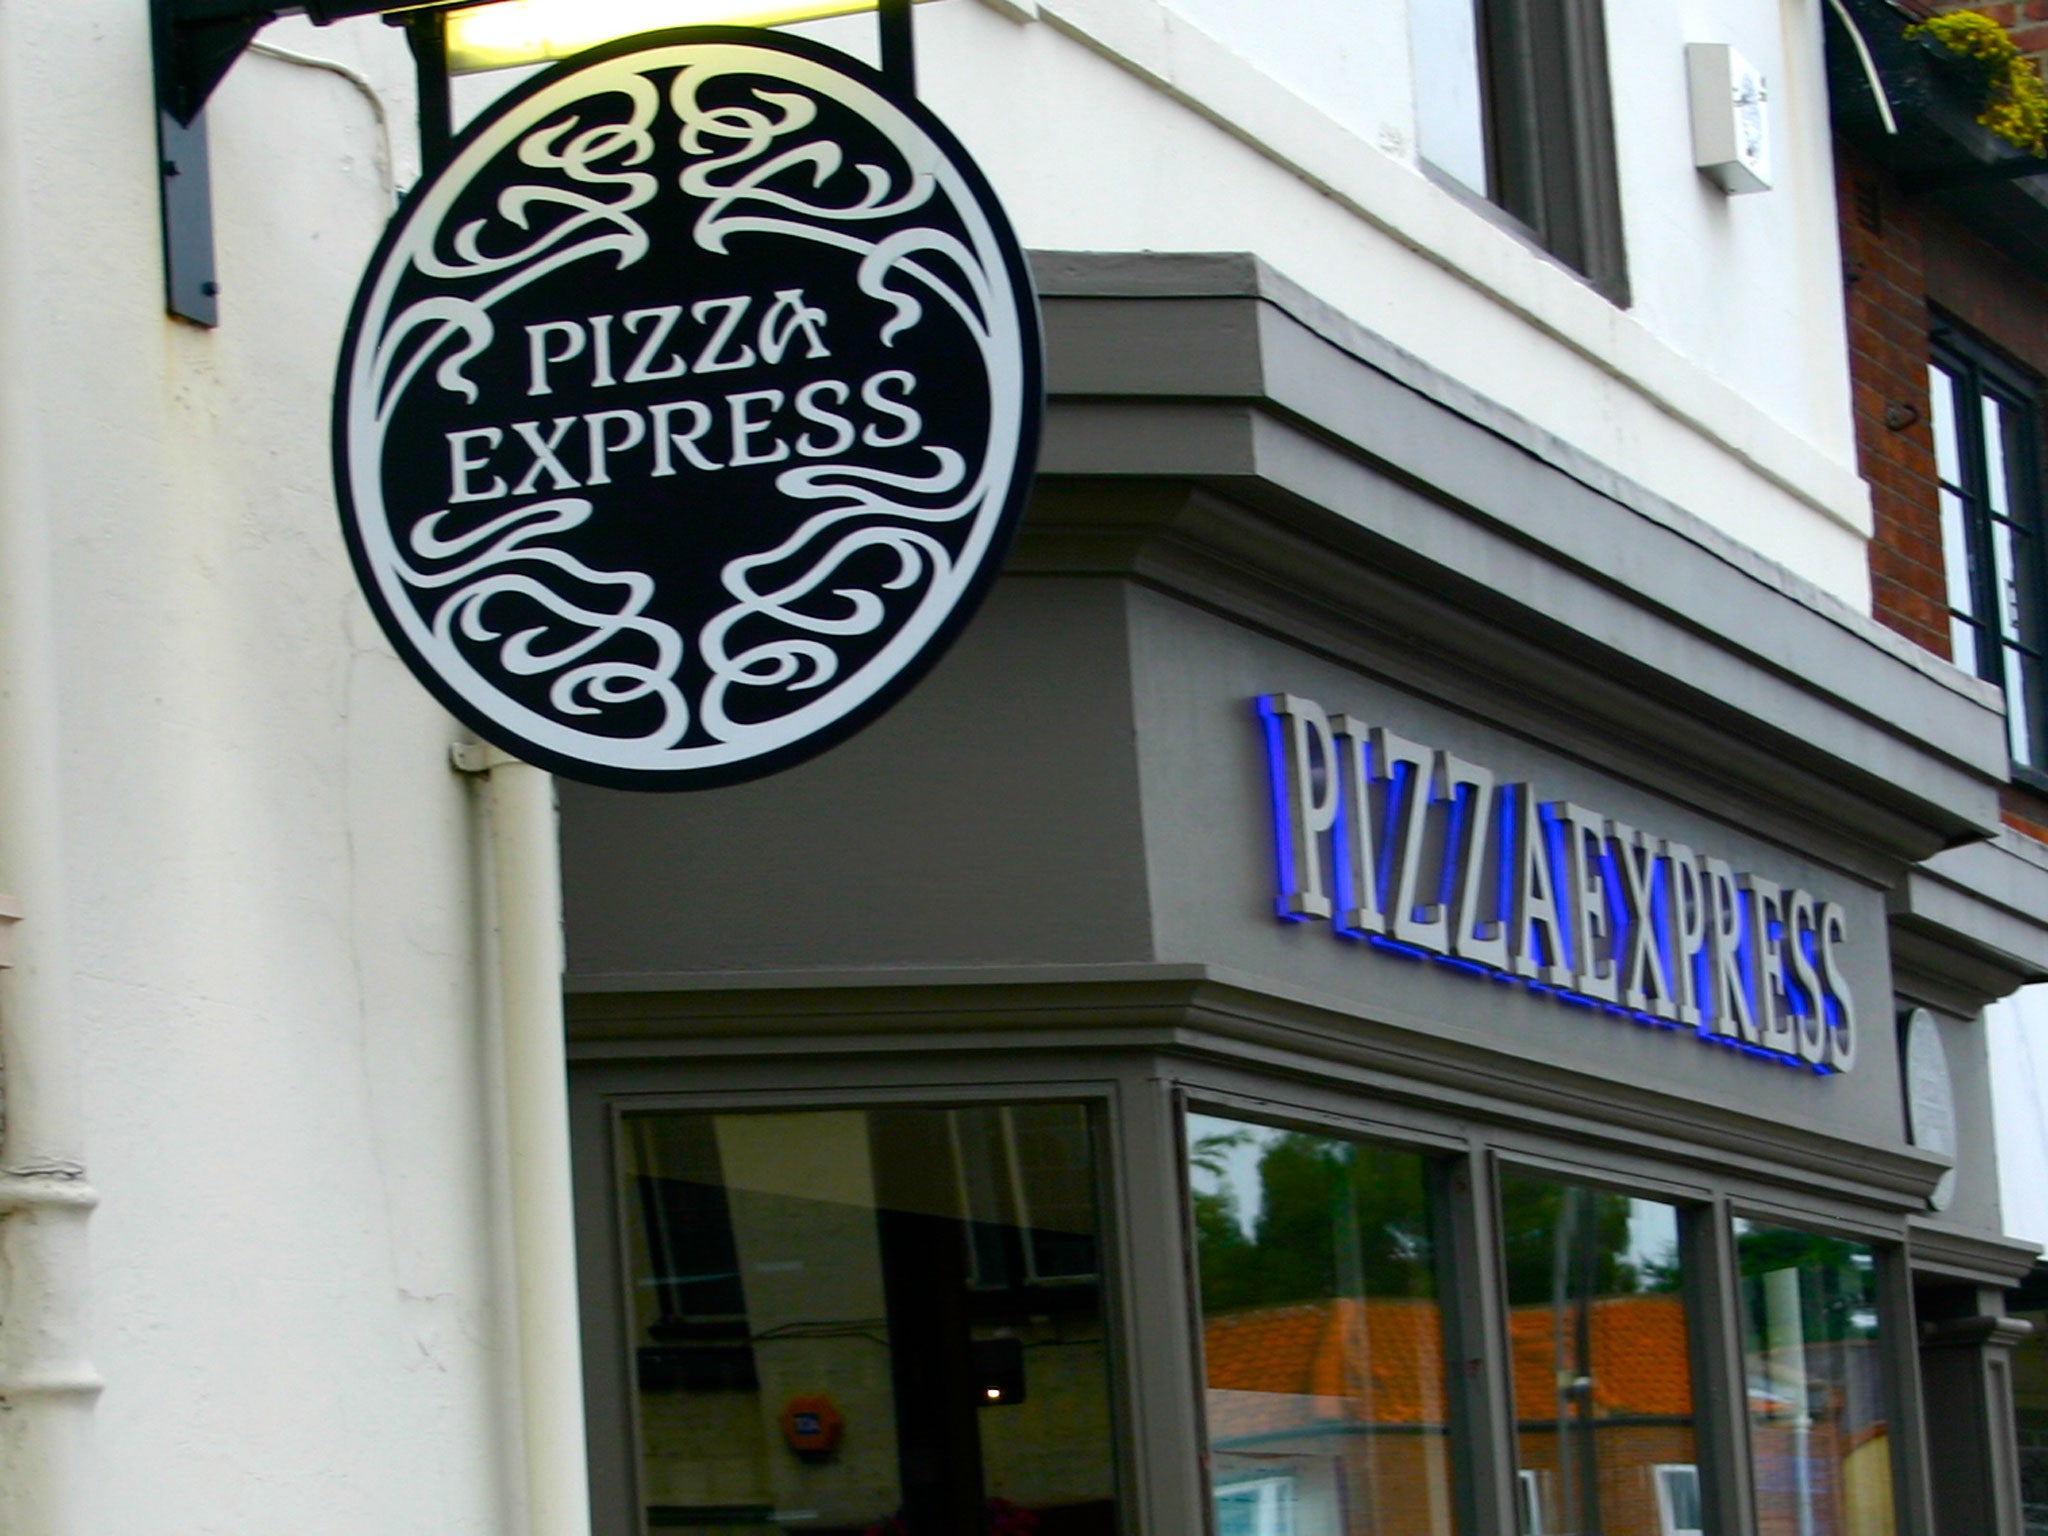 Pizza Express: Struggling restaurant chain prepares for debt talks with